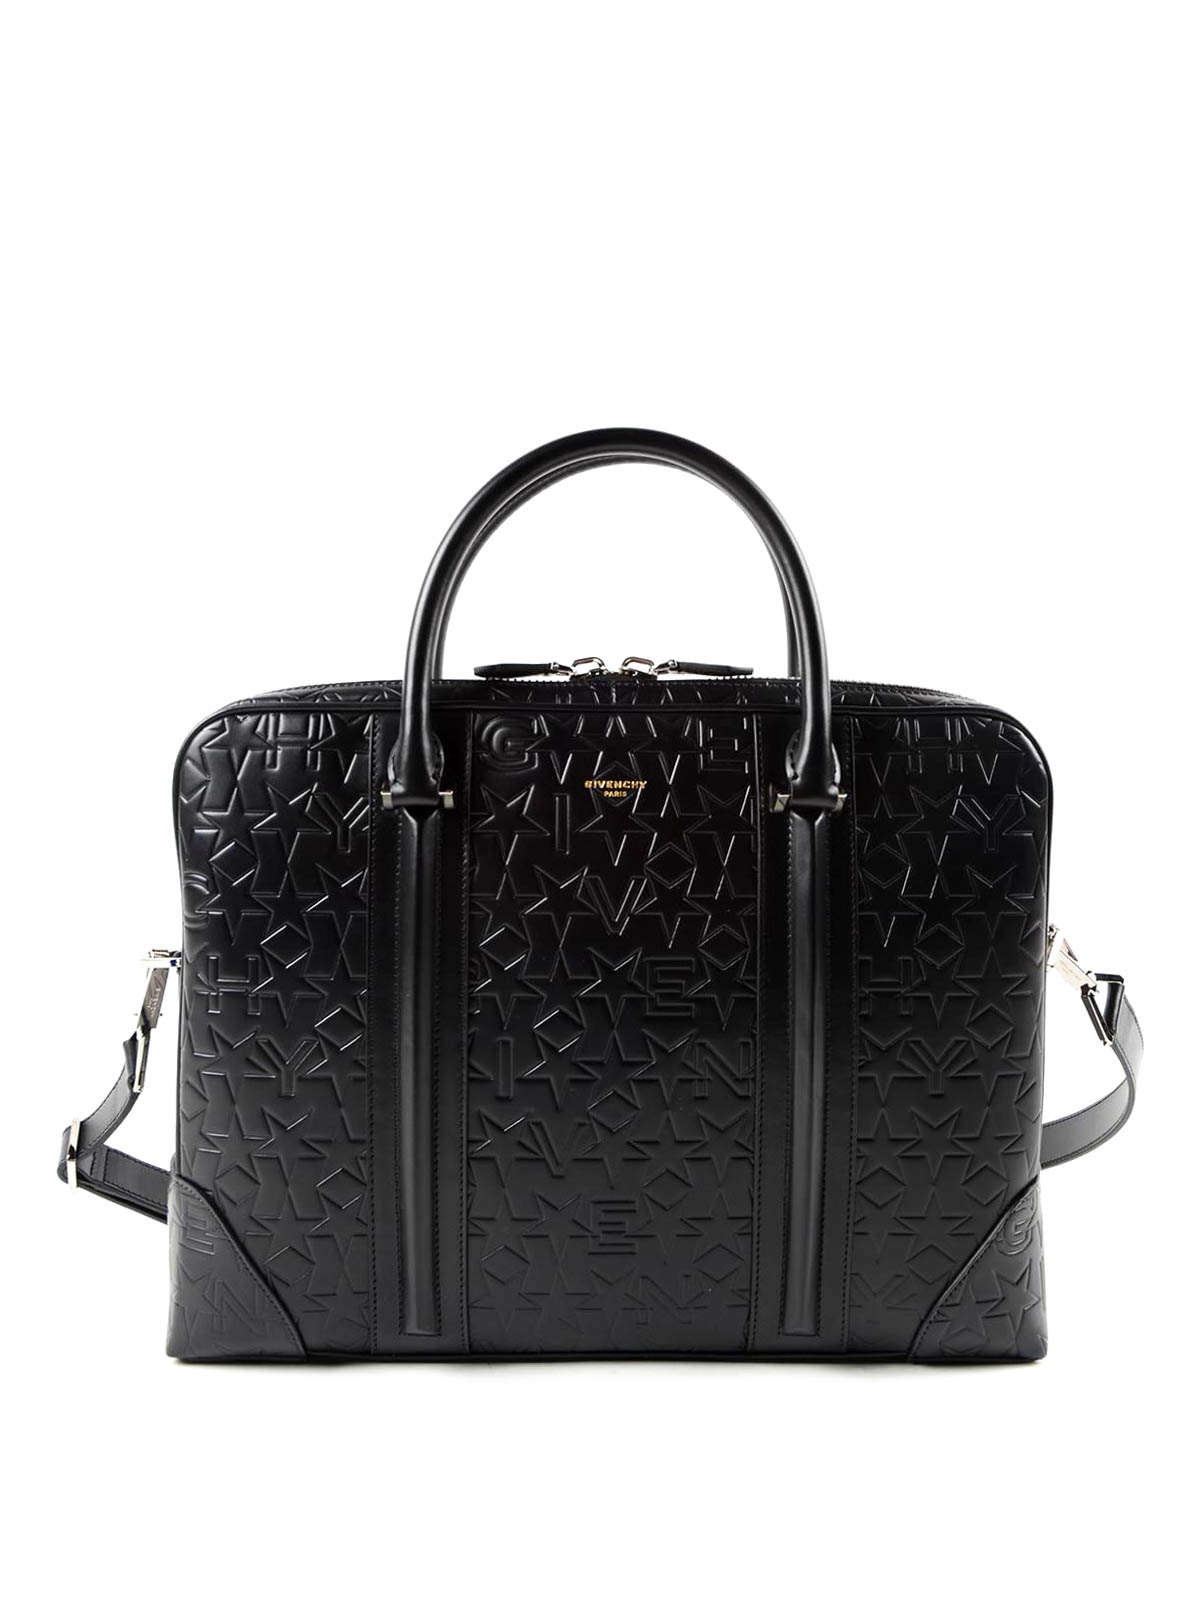 Givenchy - Embossed leather bag 